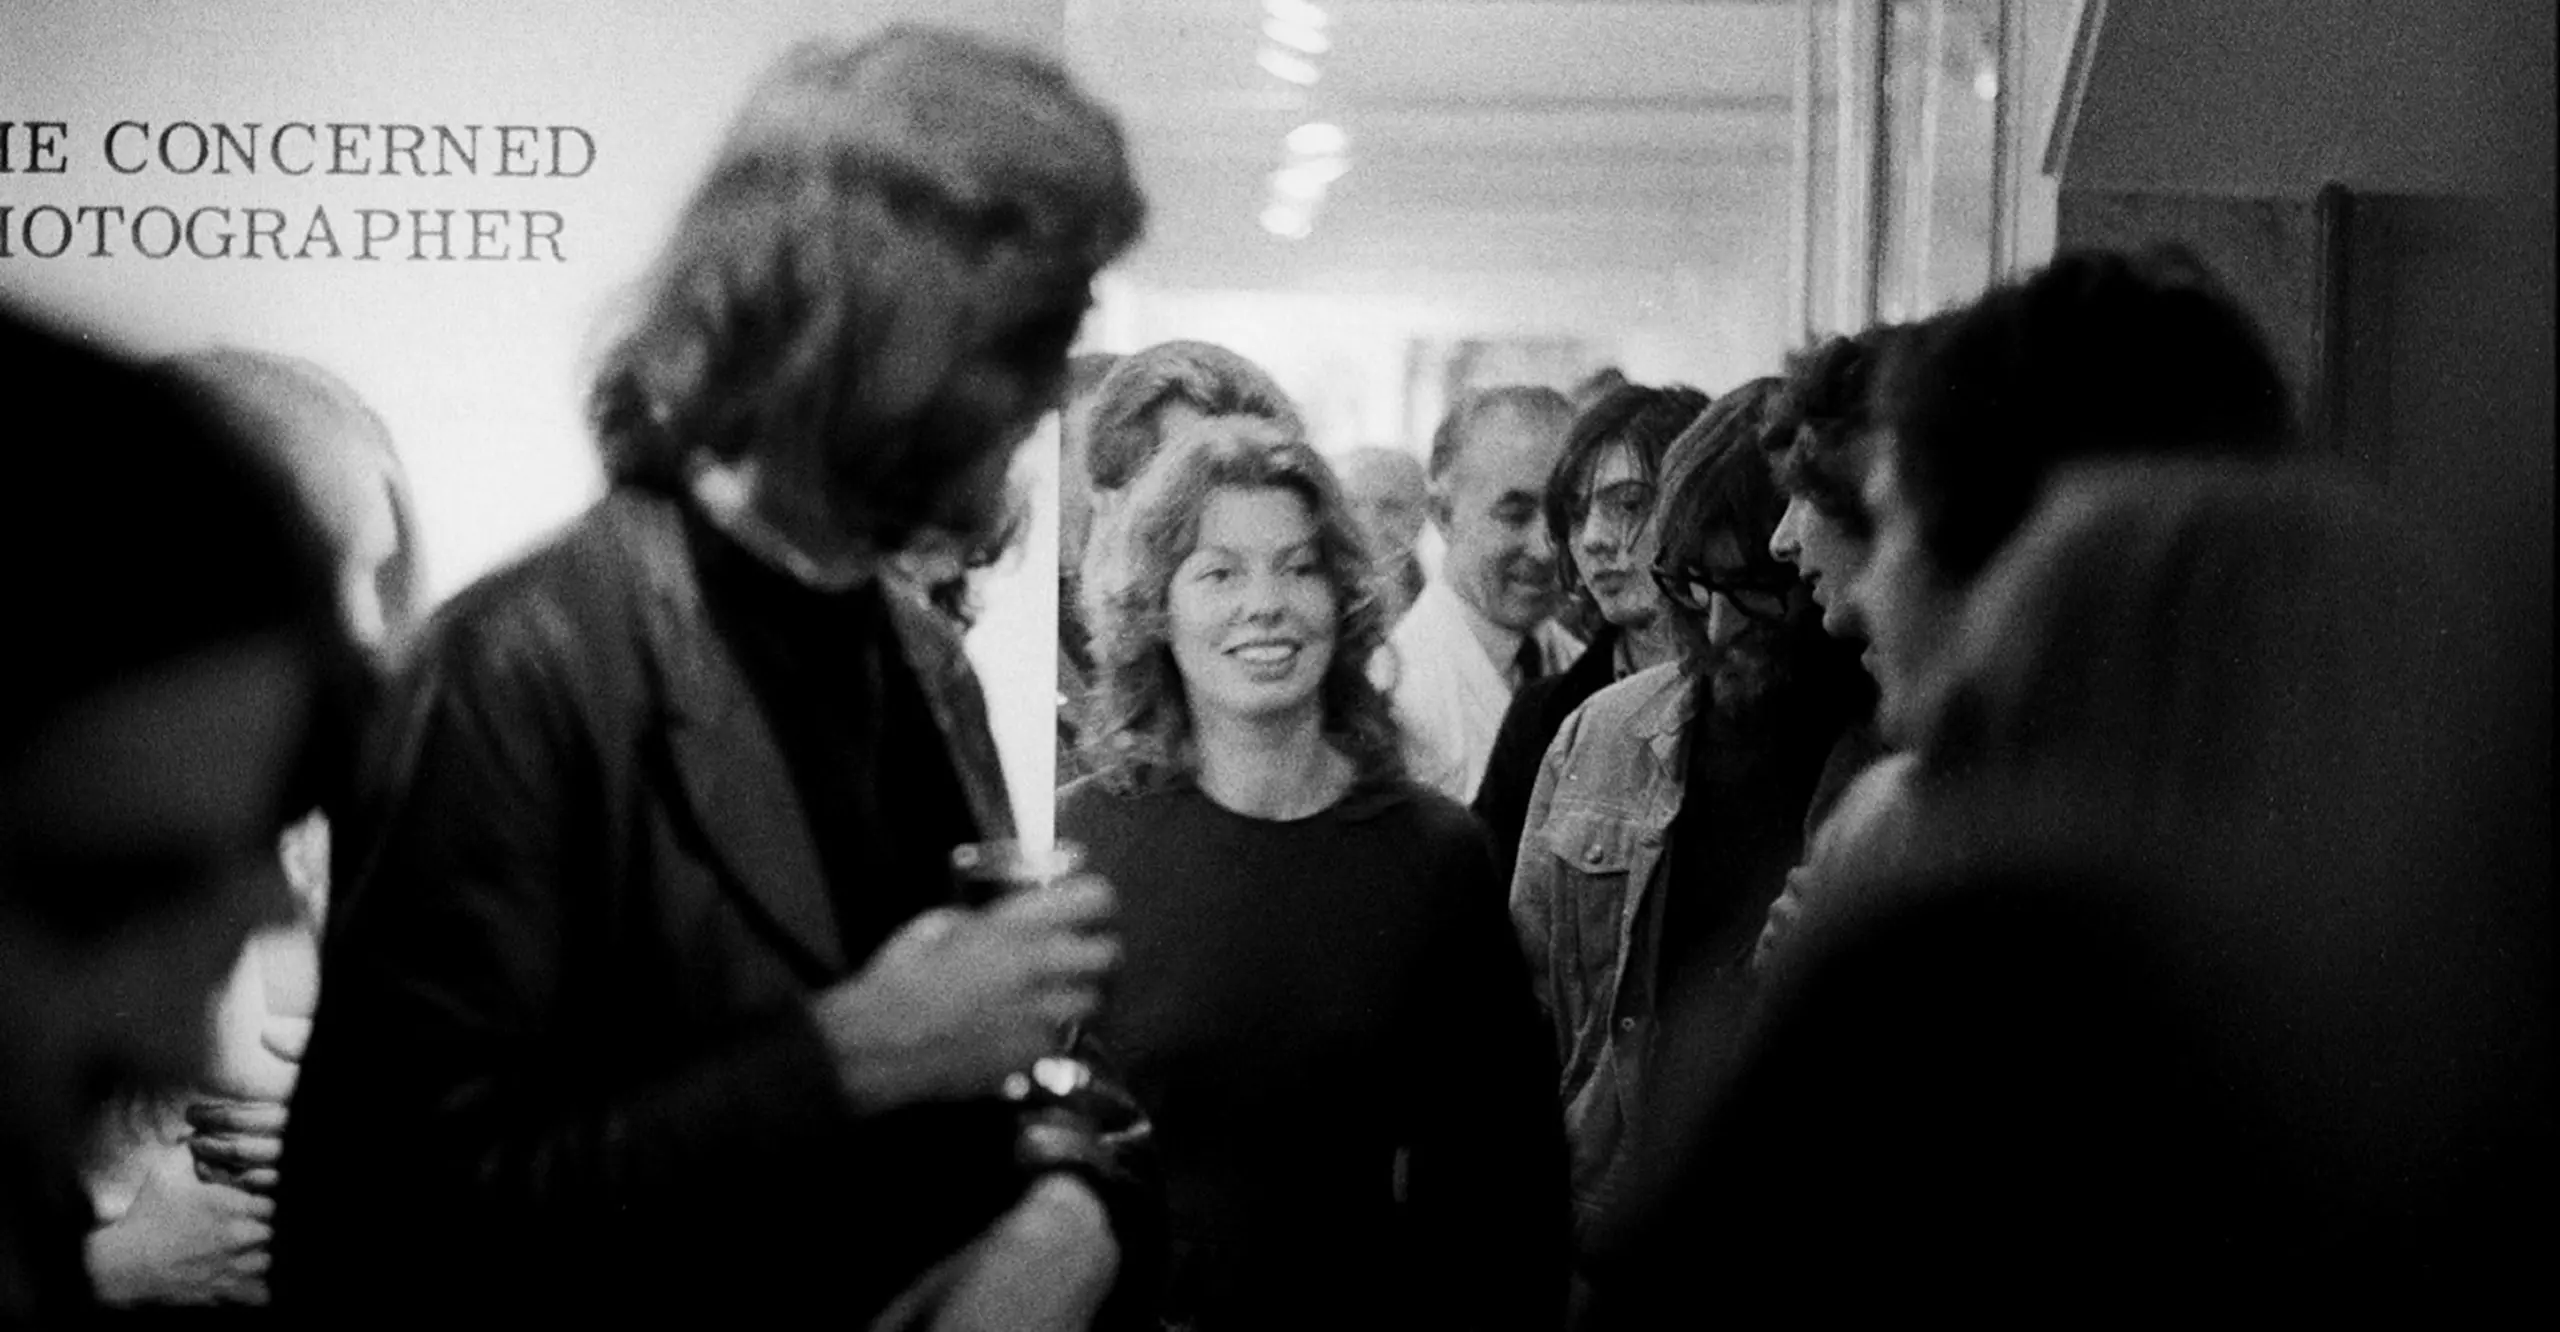 An image from the private view for The Concerned Photographer, the first exhibition at The Photographers' Gallery in 1971. Sue Davies is pictured in the middle of a large crowd. 